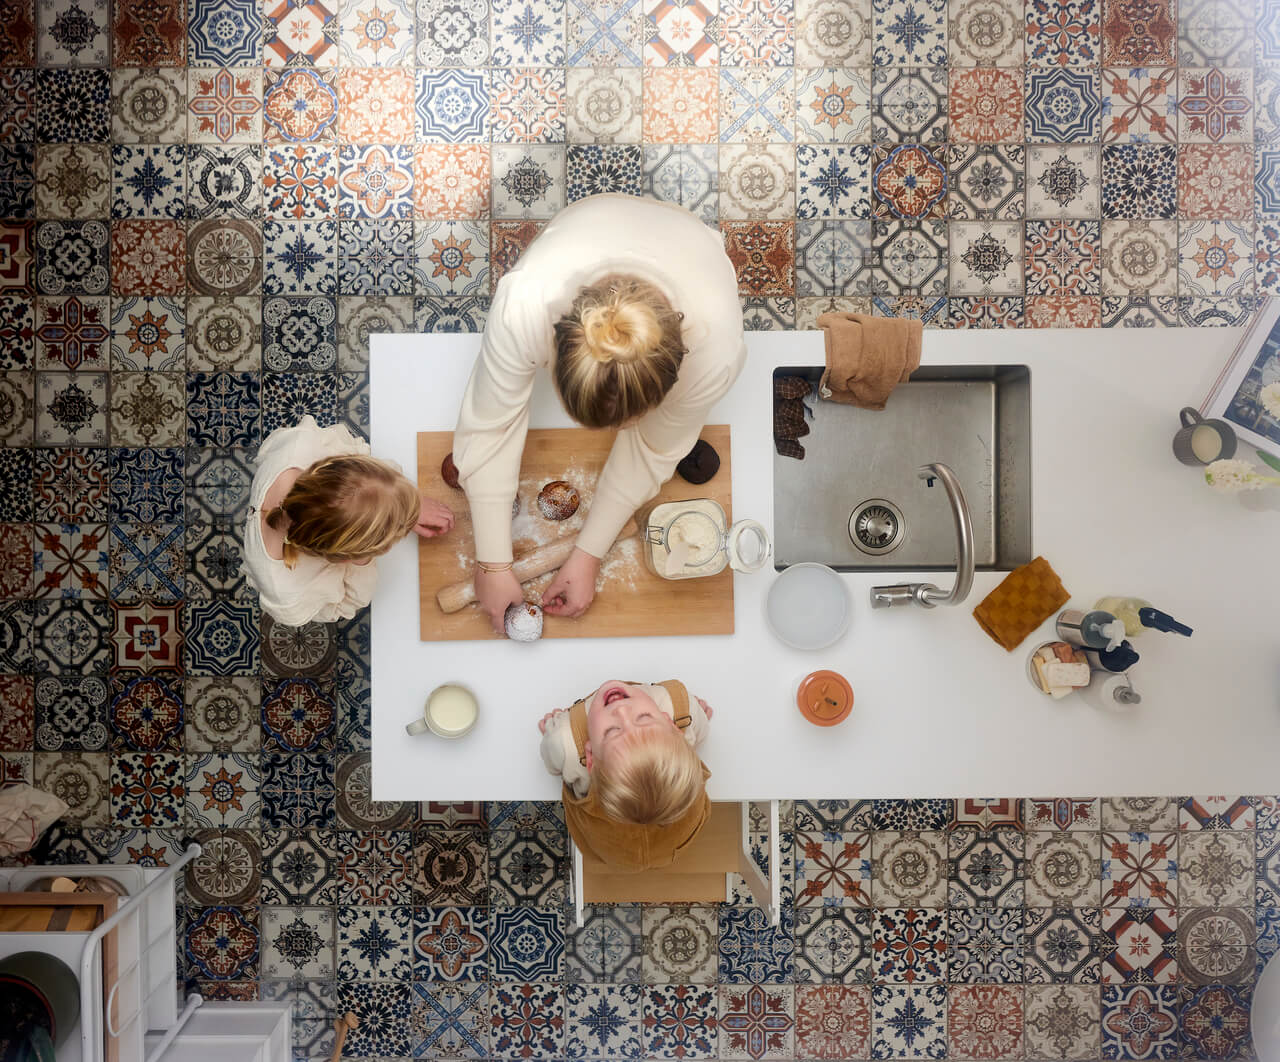 A view from above to the woman and two kids in the kitchen.